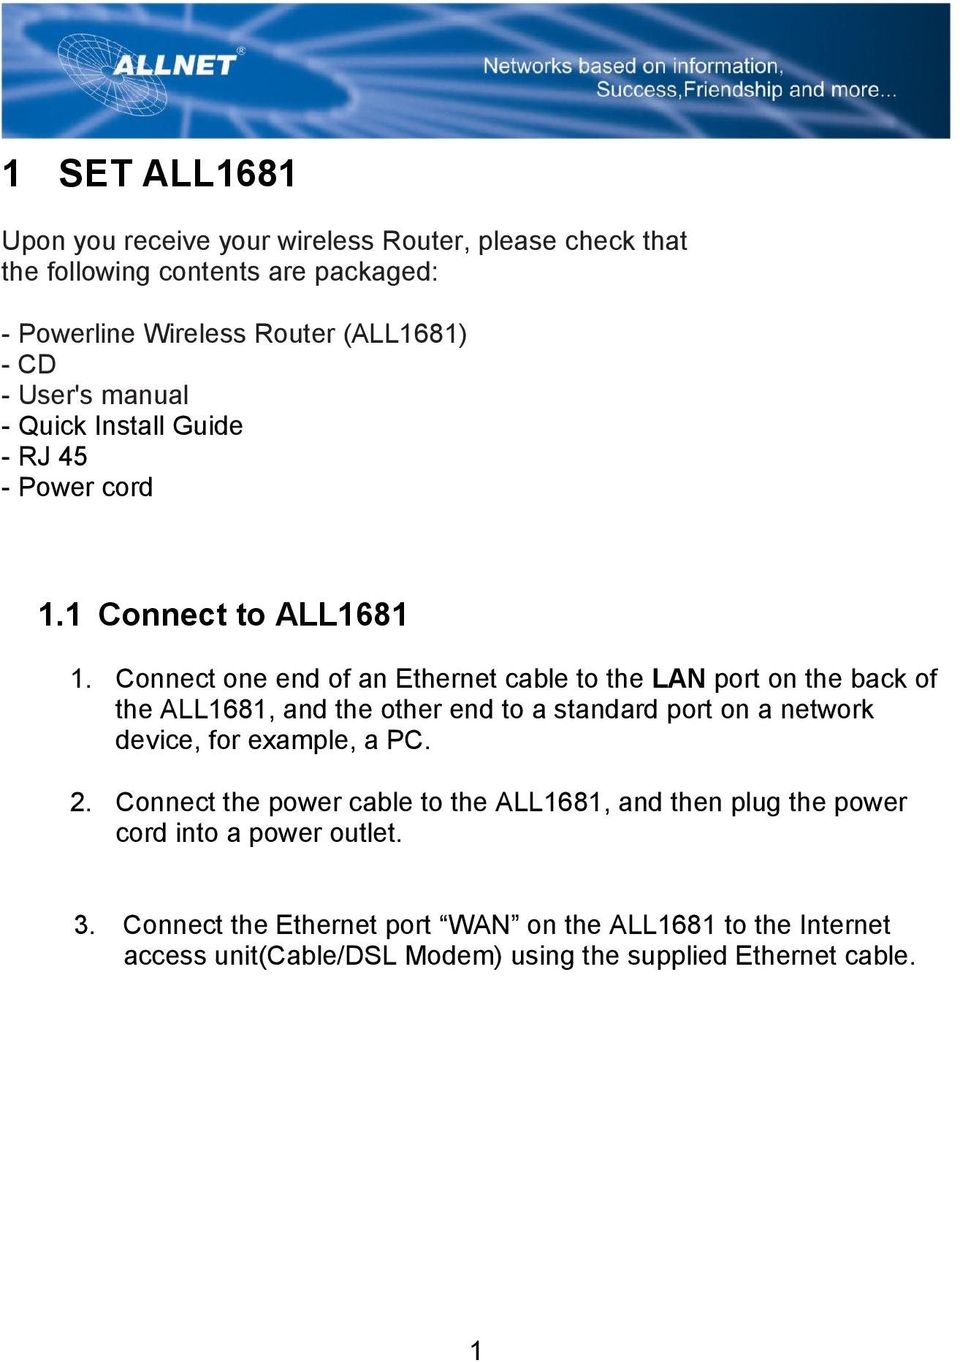 Connect one end of an Ethernet cable to the LAN port on the back of the ALL1681, and the other end to a standard port on a network device, for example, a